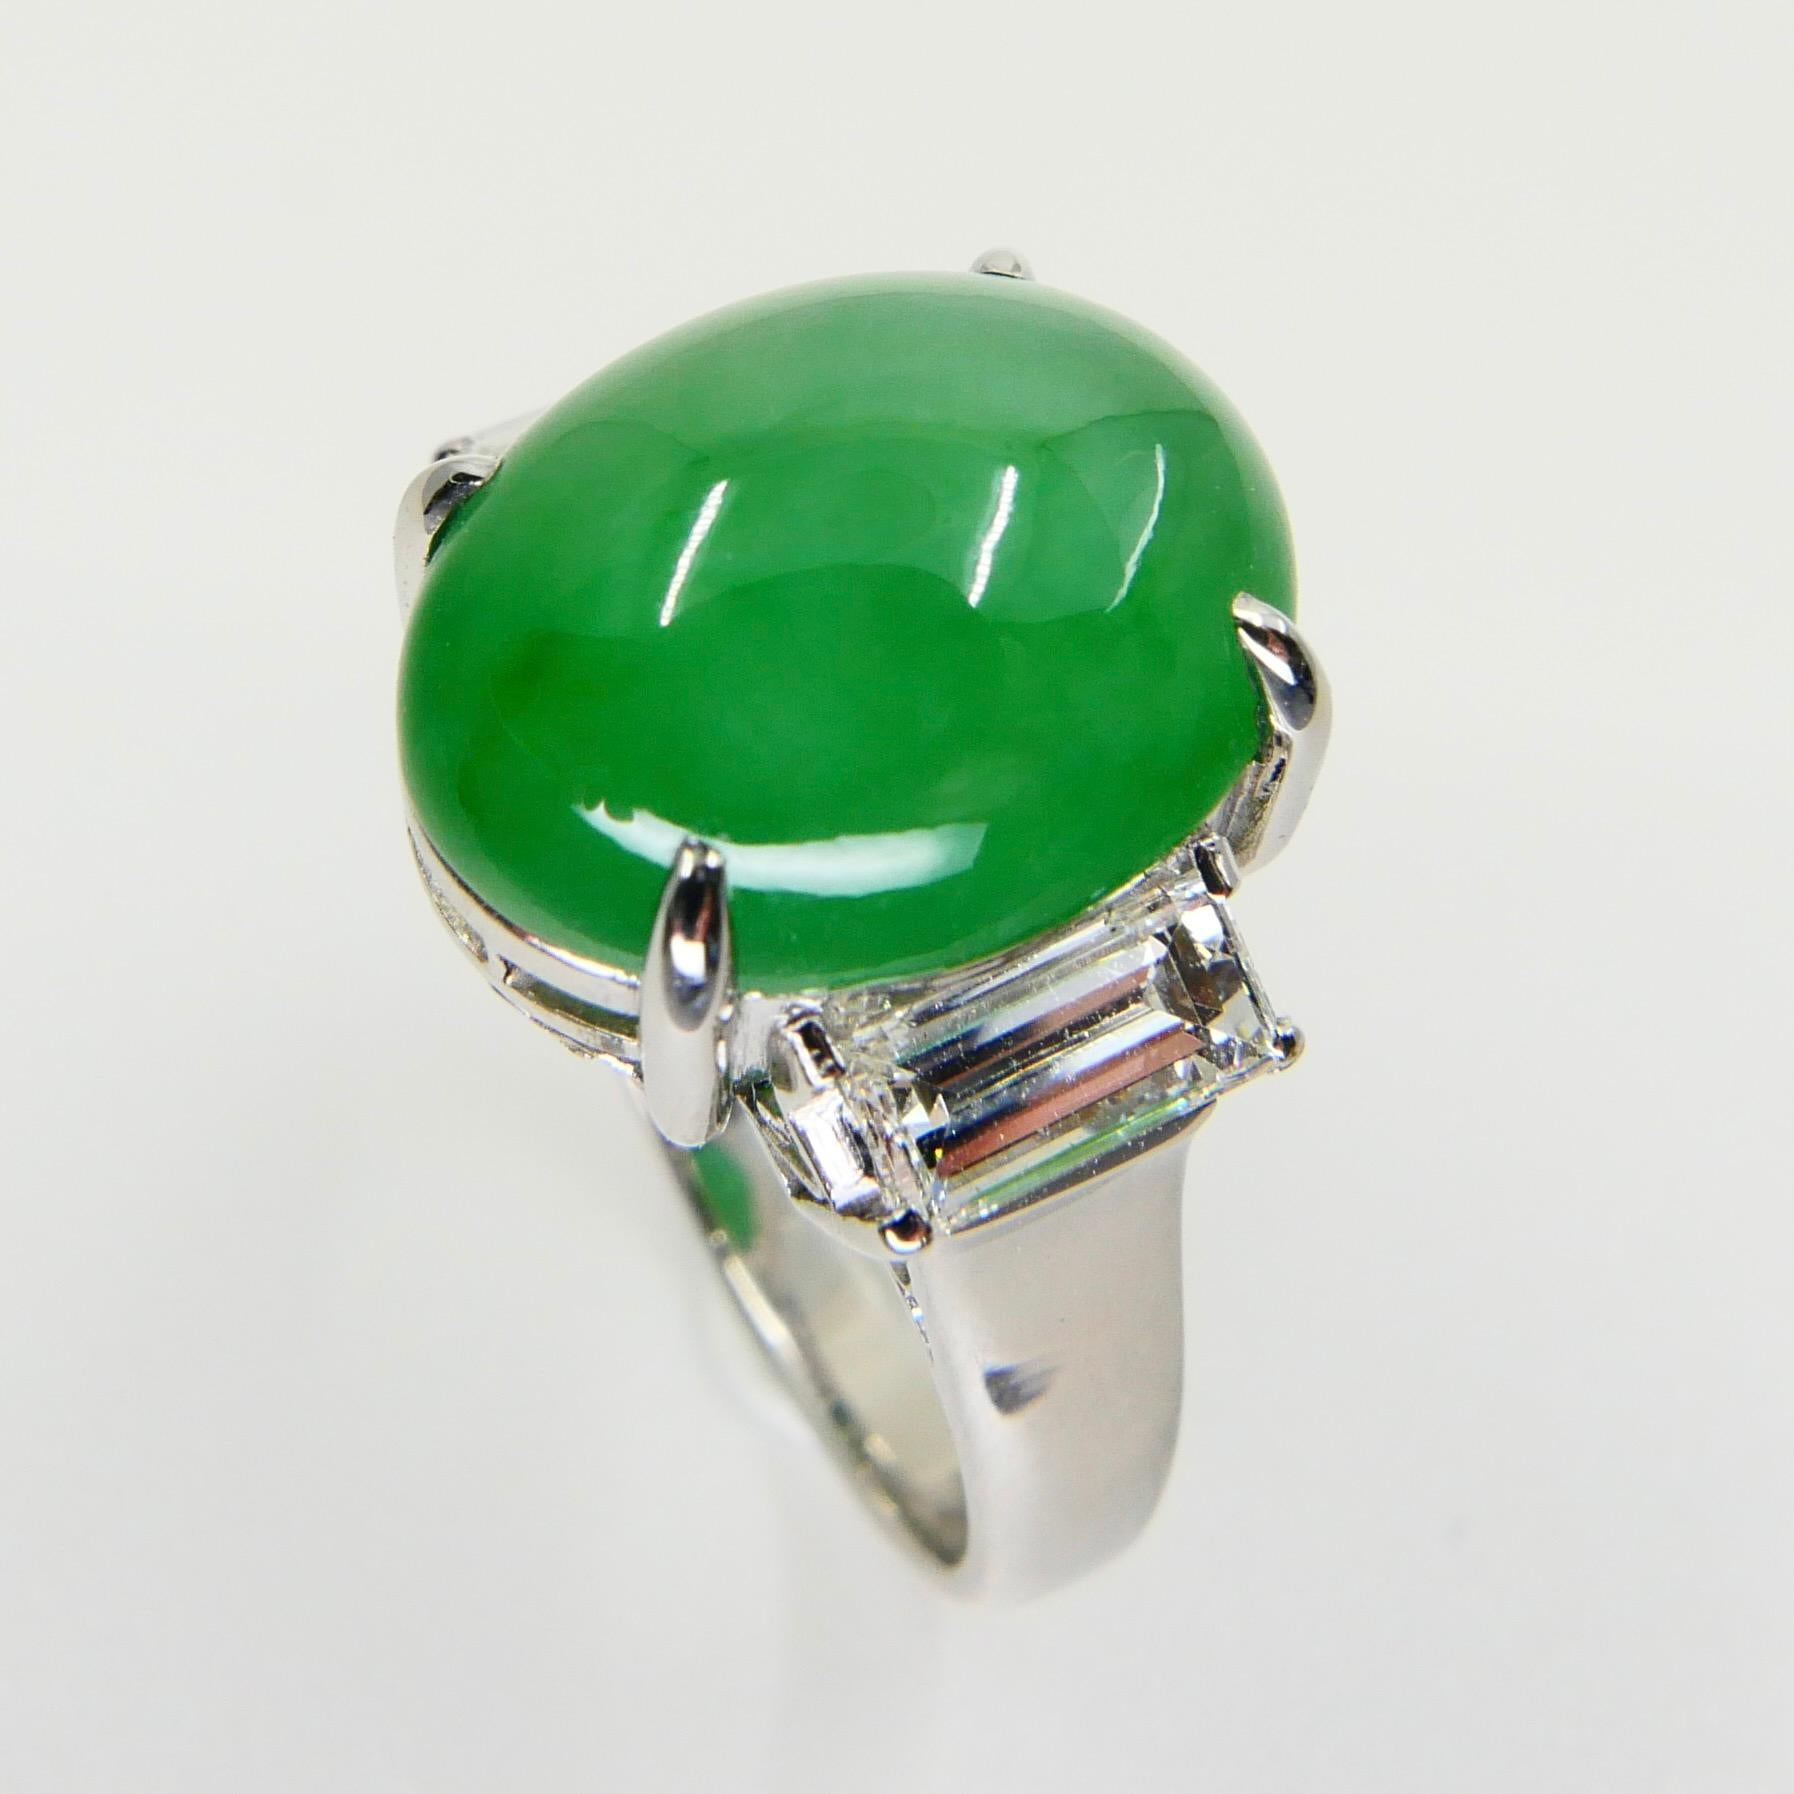 Contemporary GIA Certified 7.06 Cts Jade & Diamond 3 Stone Vintage Ring, Light Apple Green